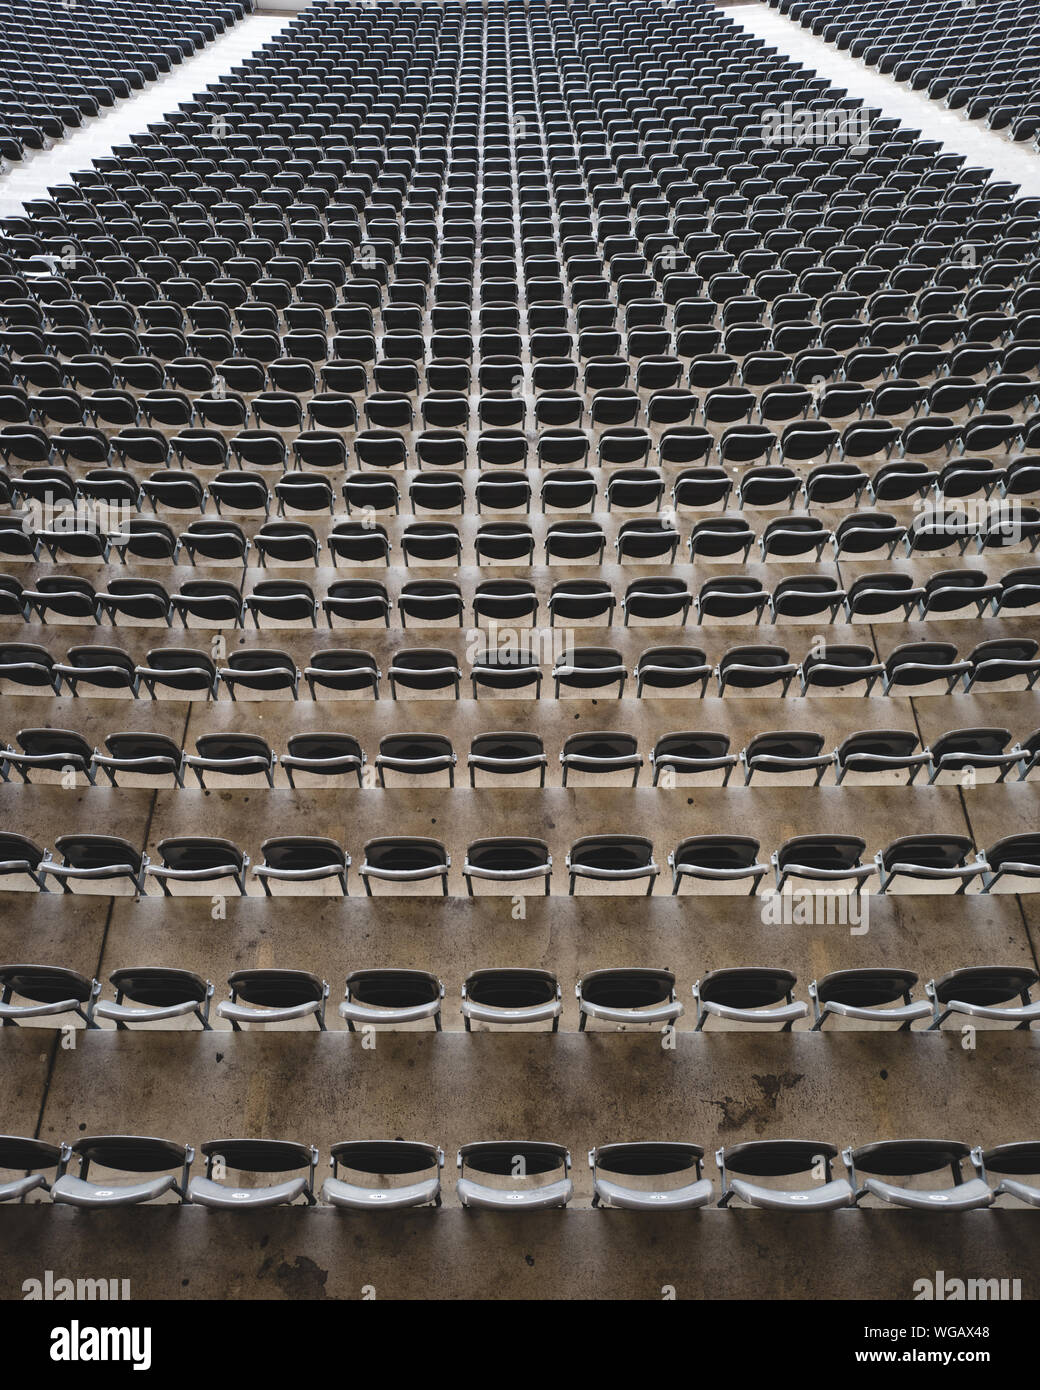 High Angle View Of Seats At Olympiastadion Berlin Stock Photo